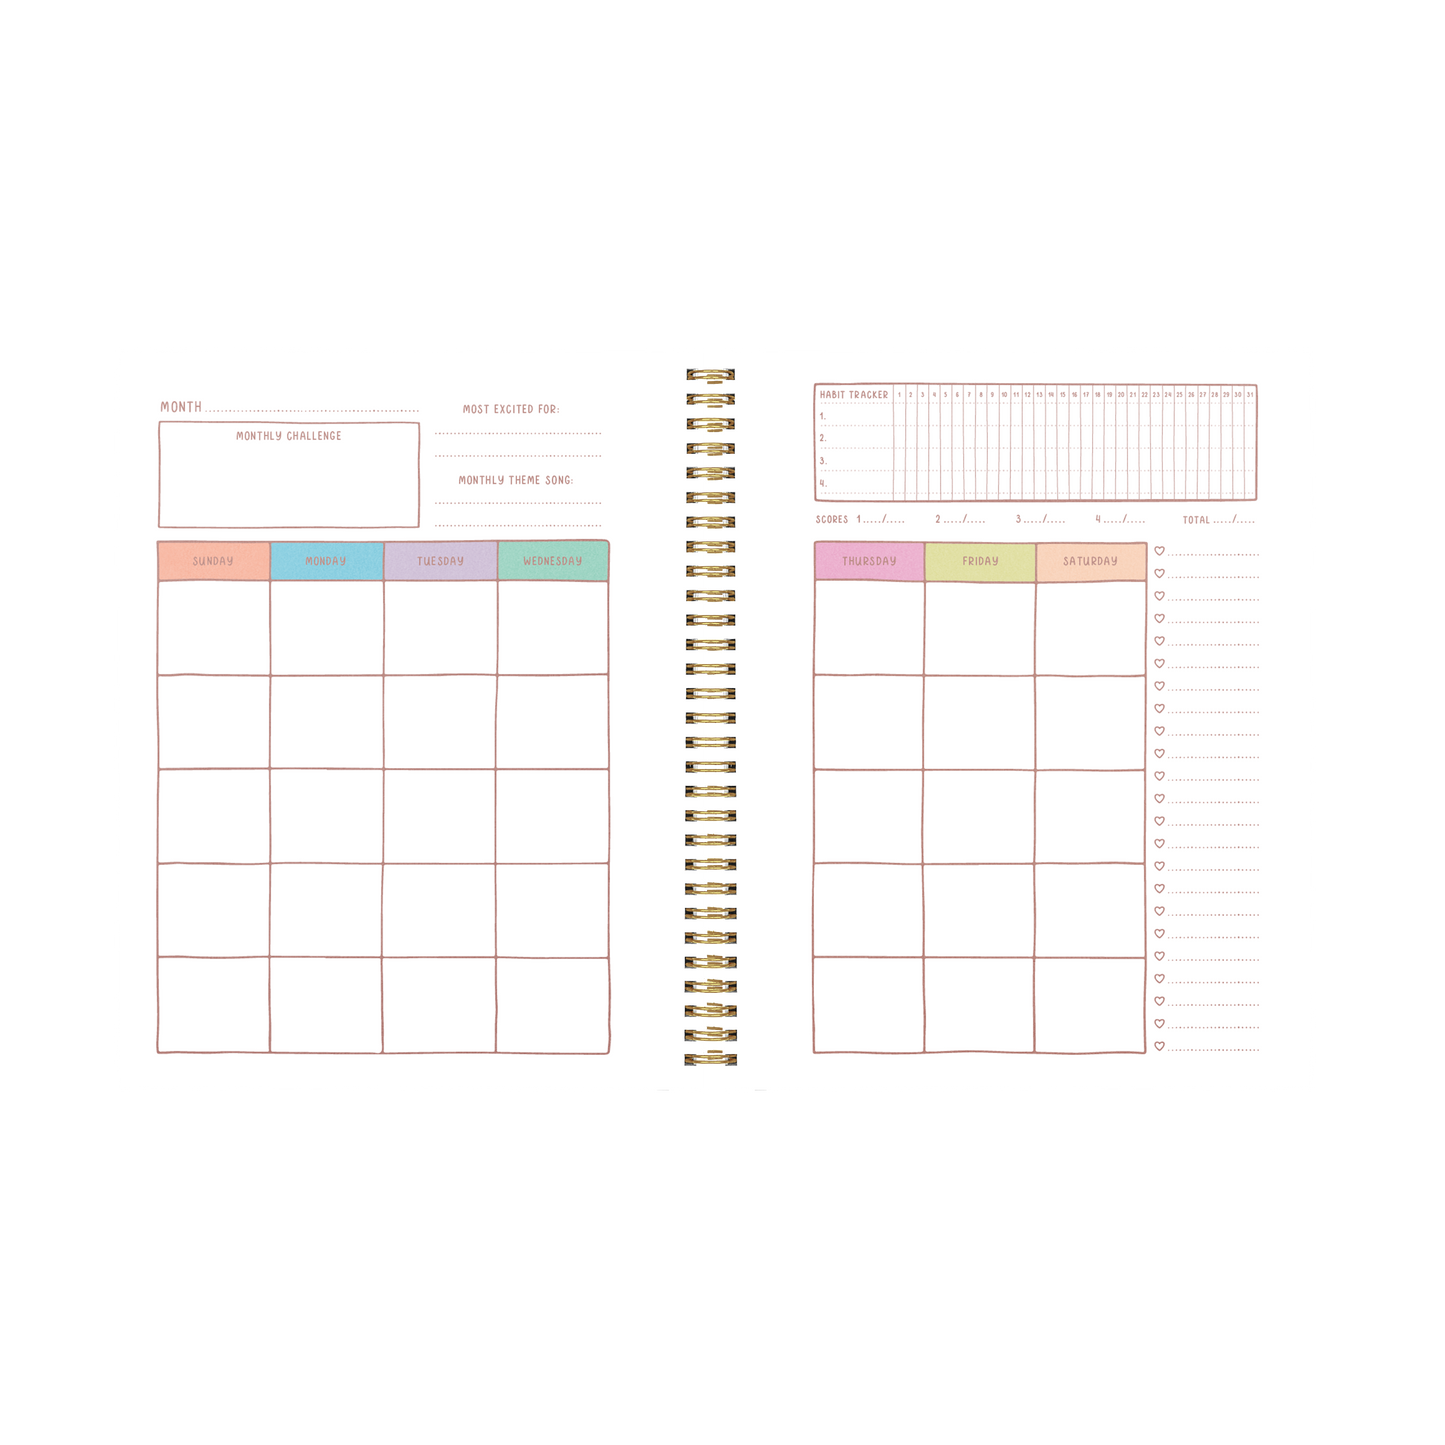 Radiance Floral Perpetual Planner (large)